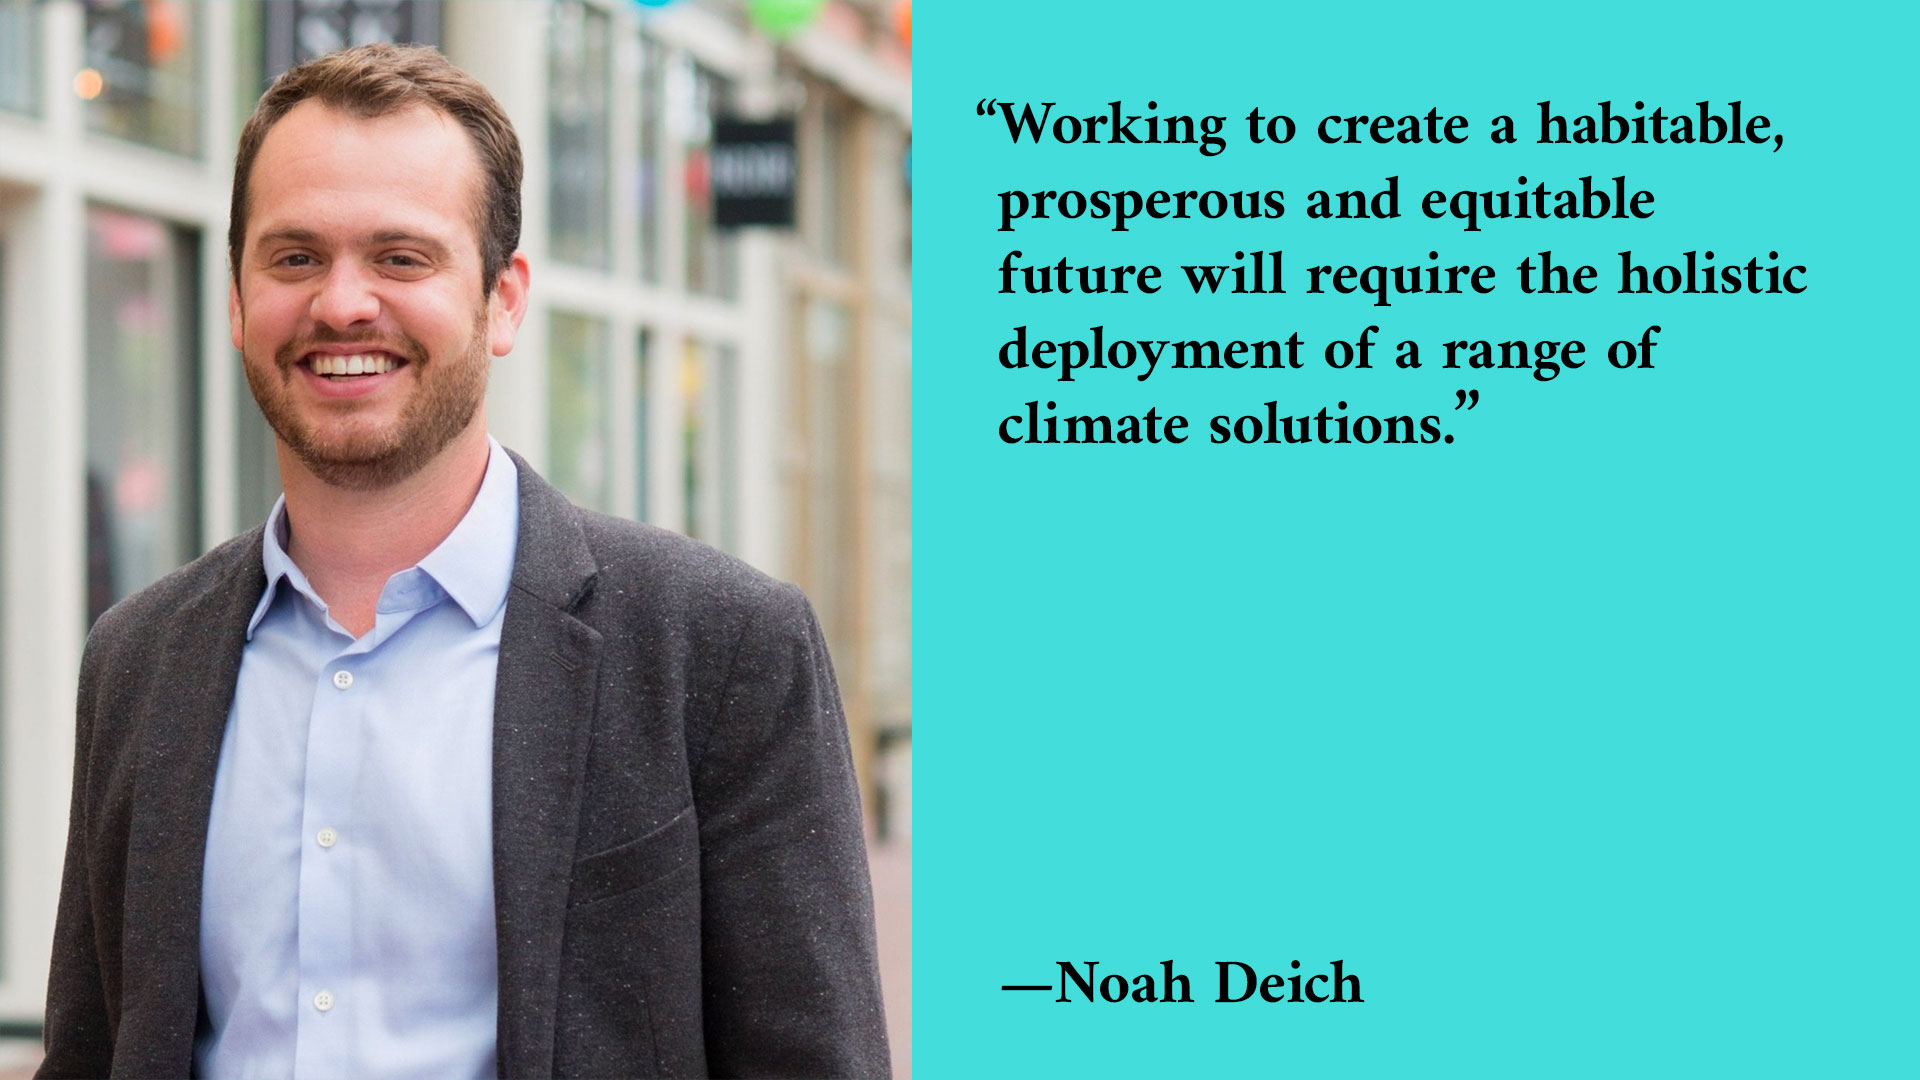 A photo of a smiling man next to a quote that reads: Working to create a habitable, prosperous, and equitable future will require the holistic deployment of a range of climate solutions. —Noah Deich